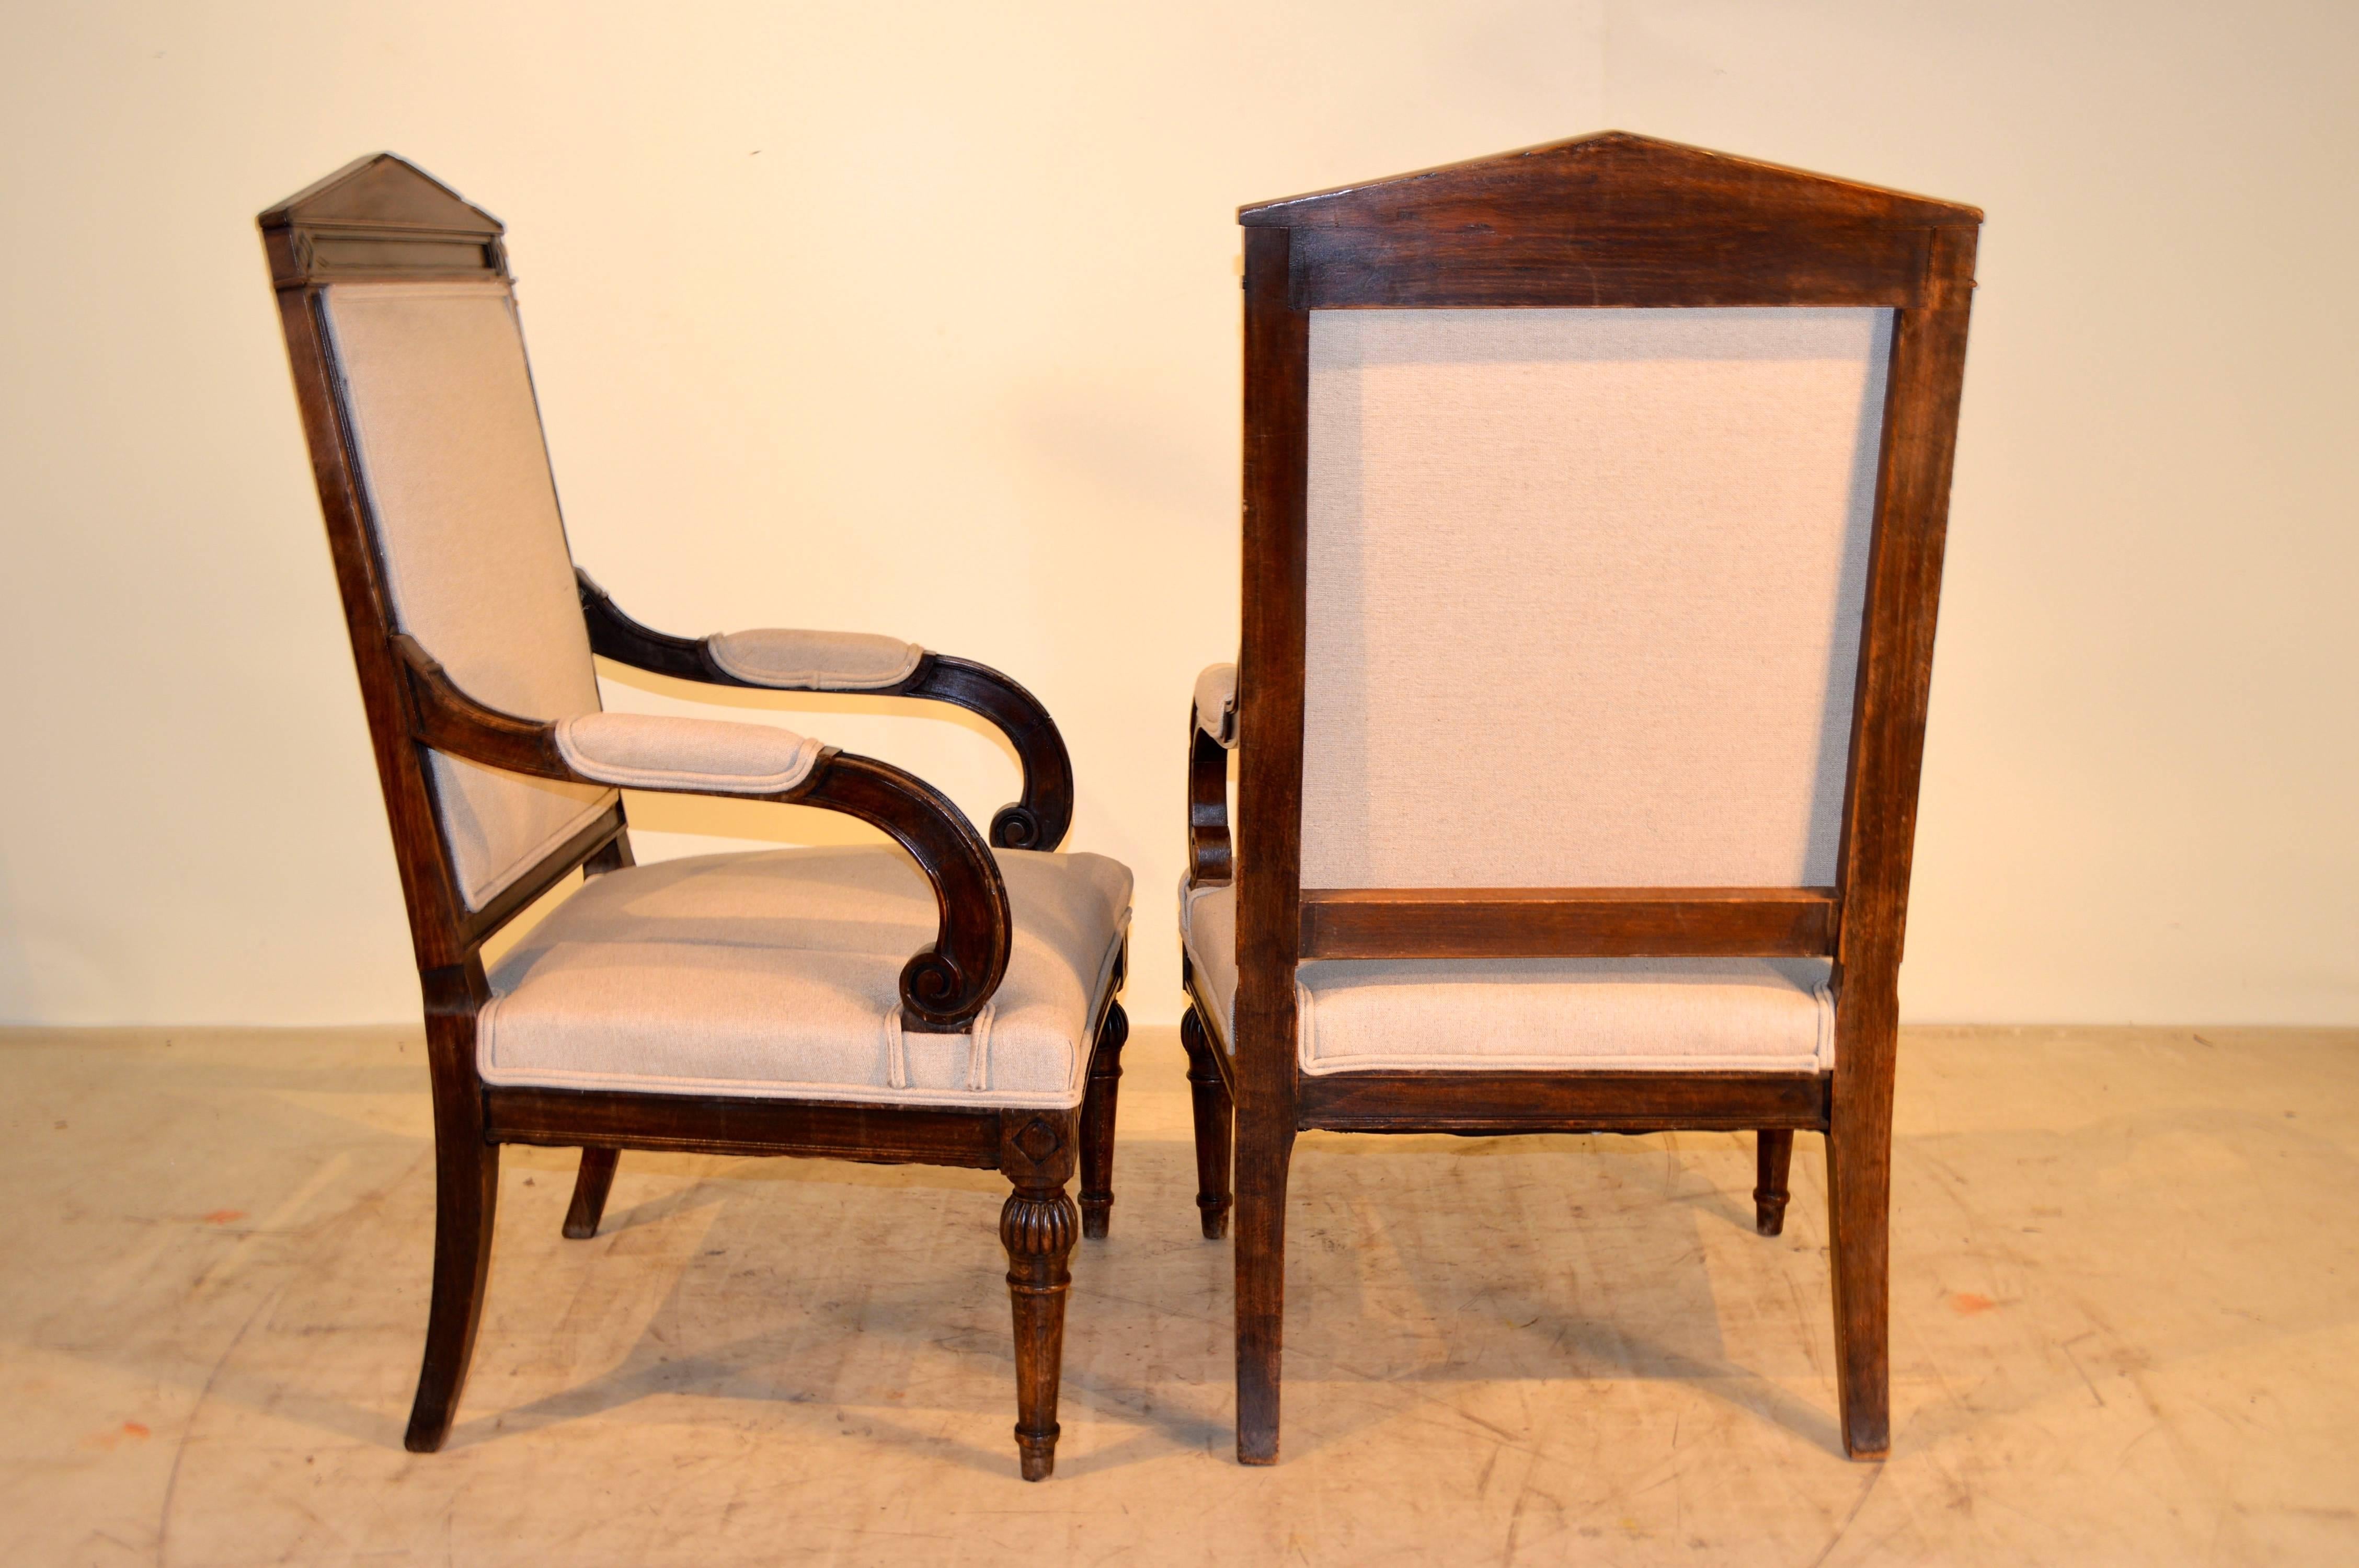 Pair of 19th century French walnut armchairs with wonderfully paneled and molded frames with beaded edge molding. Raised on carved and turned front legs and slightly splayed back legs. Newly upholstered in linen finished with double welt decoration.